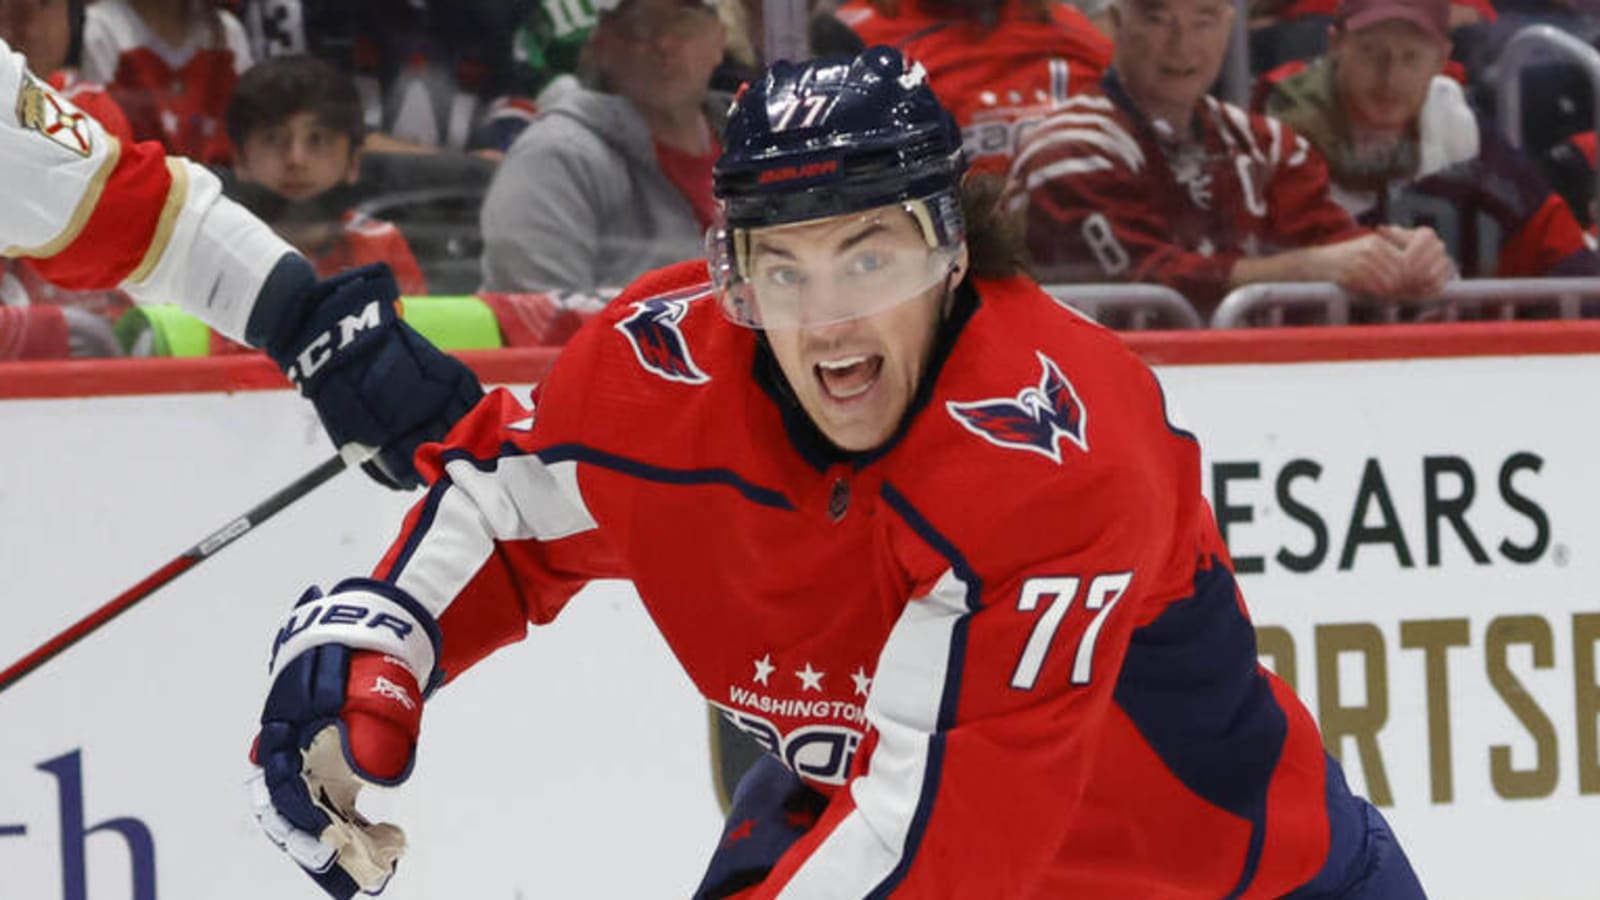 Watch: Capitals' Oshie scores thrilling game-tying goal in Game 6